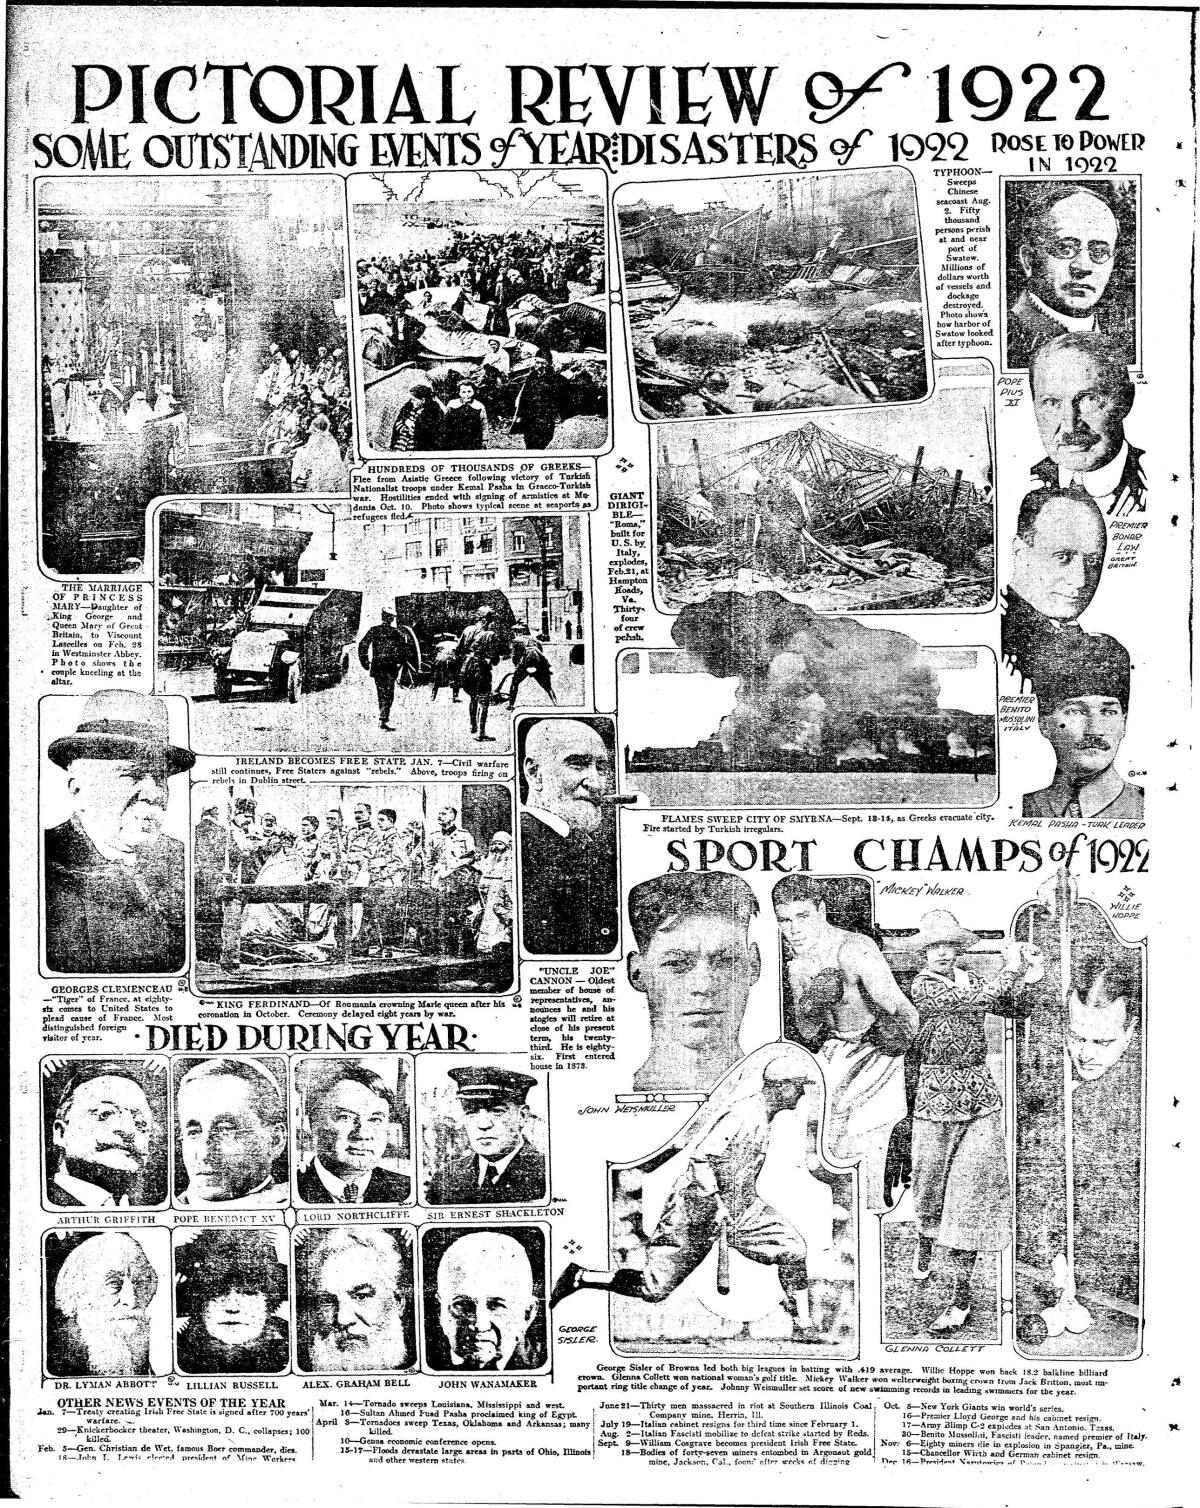 A pictorial review of the events of the year 1922, published in the Evening Tribune, Dec. 30, 1922.